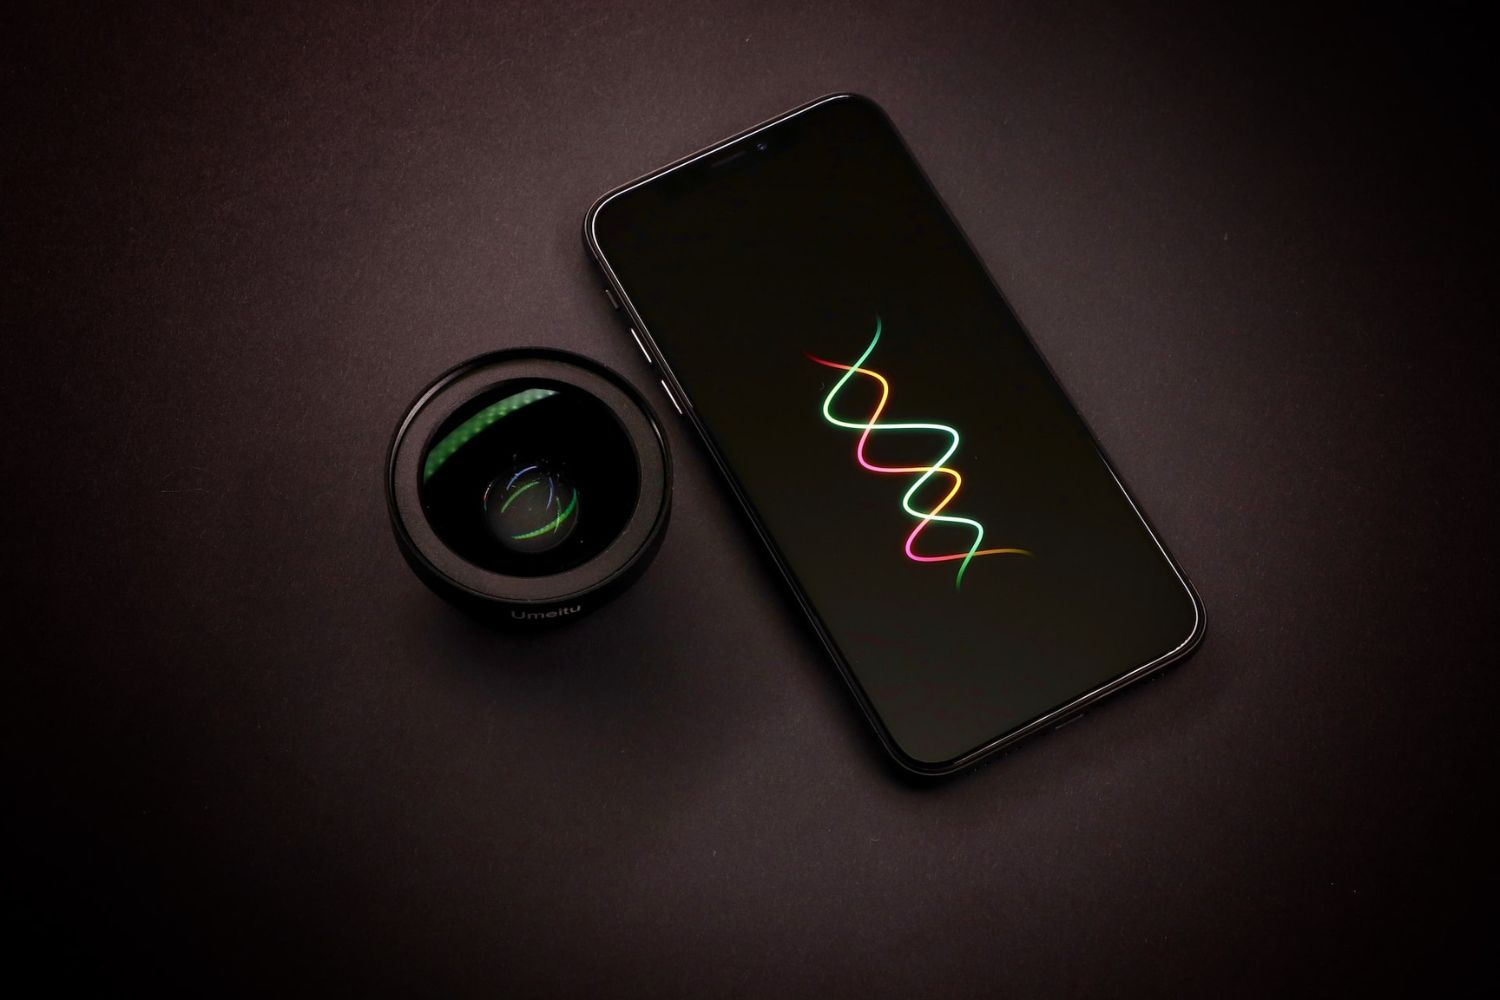 photo of phone and lens by Todd Jiang on Unsplash